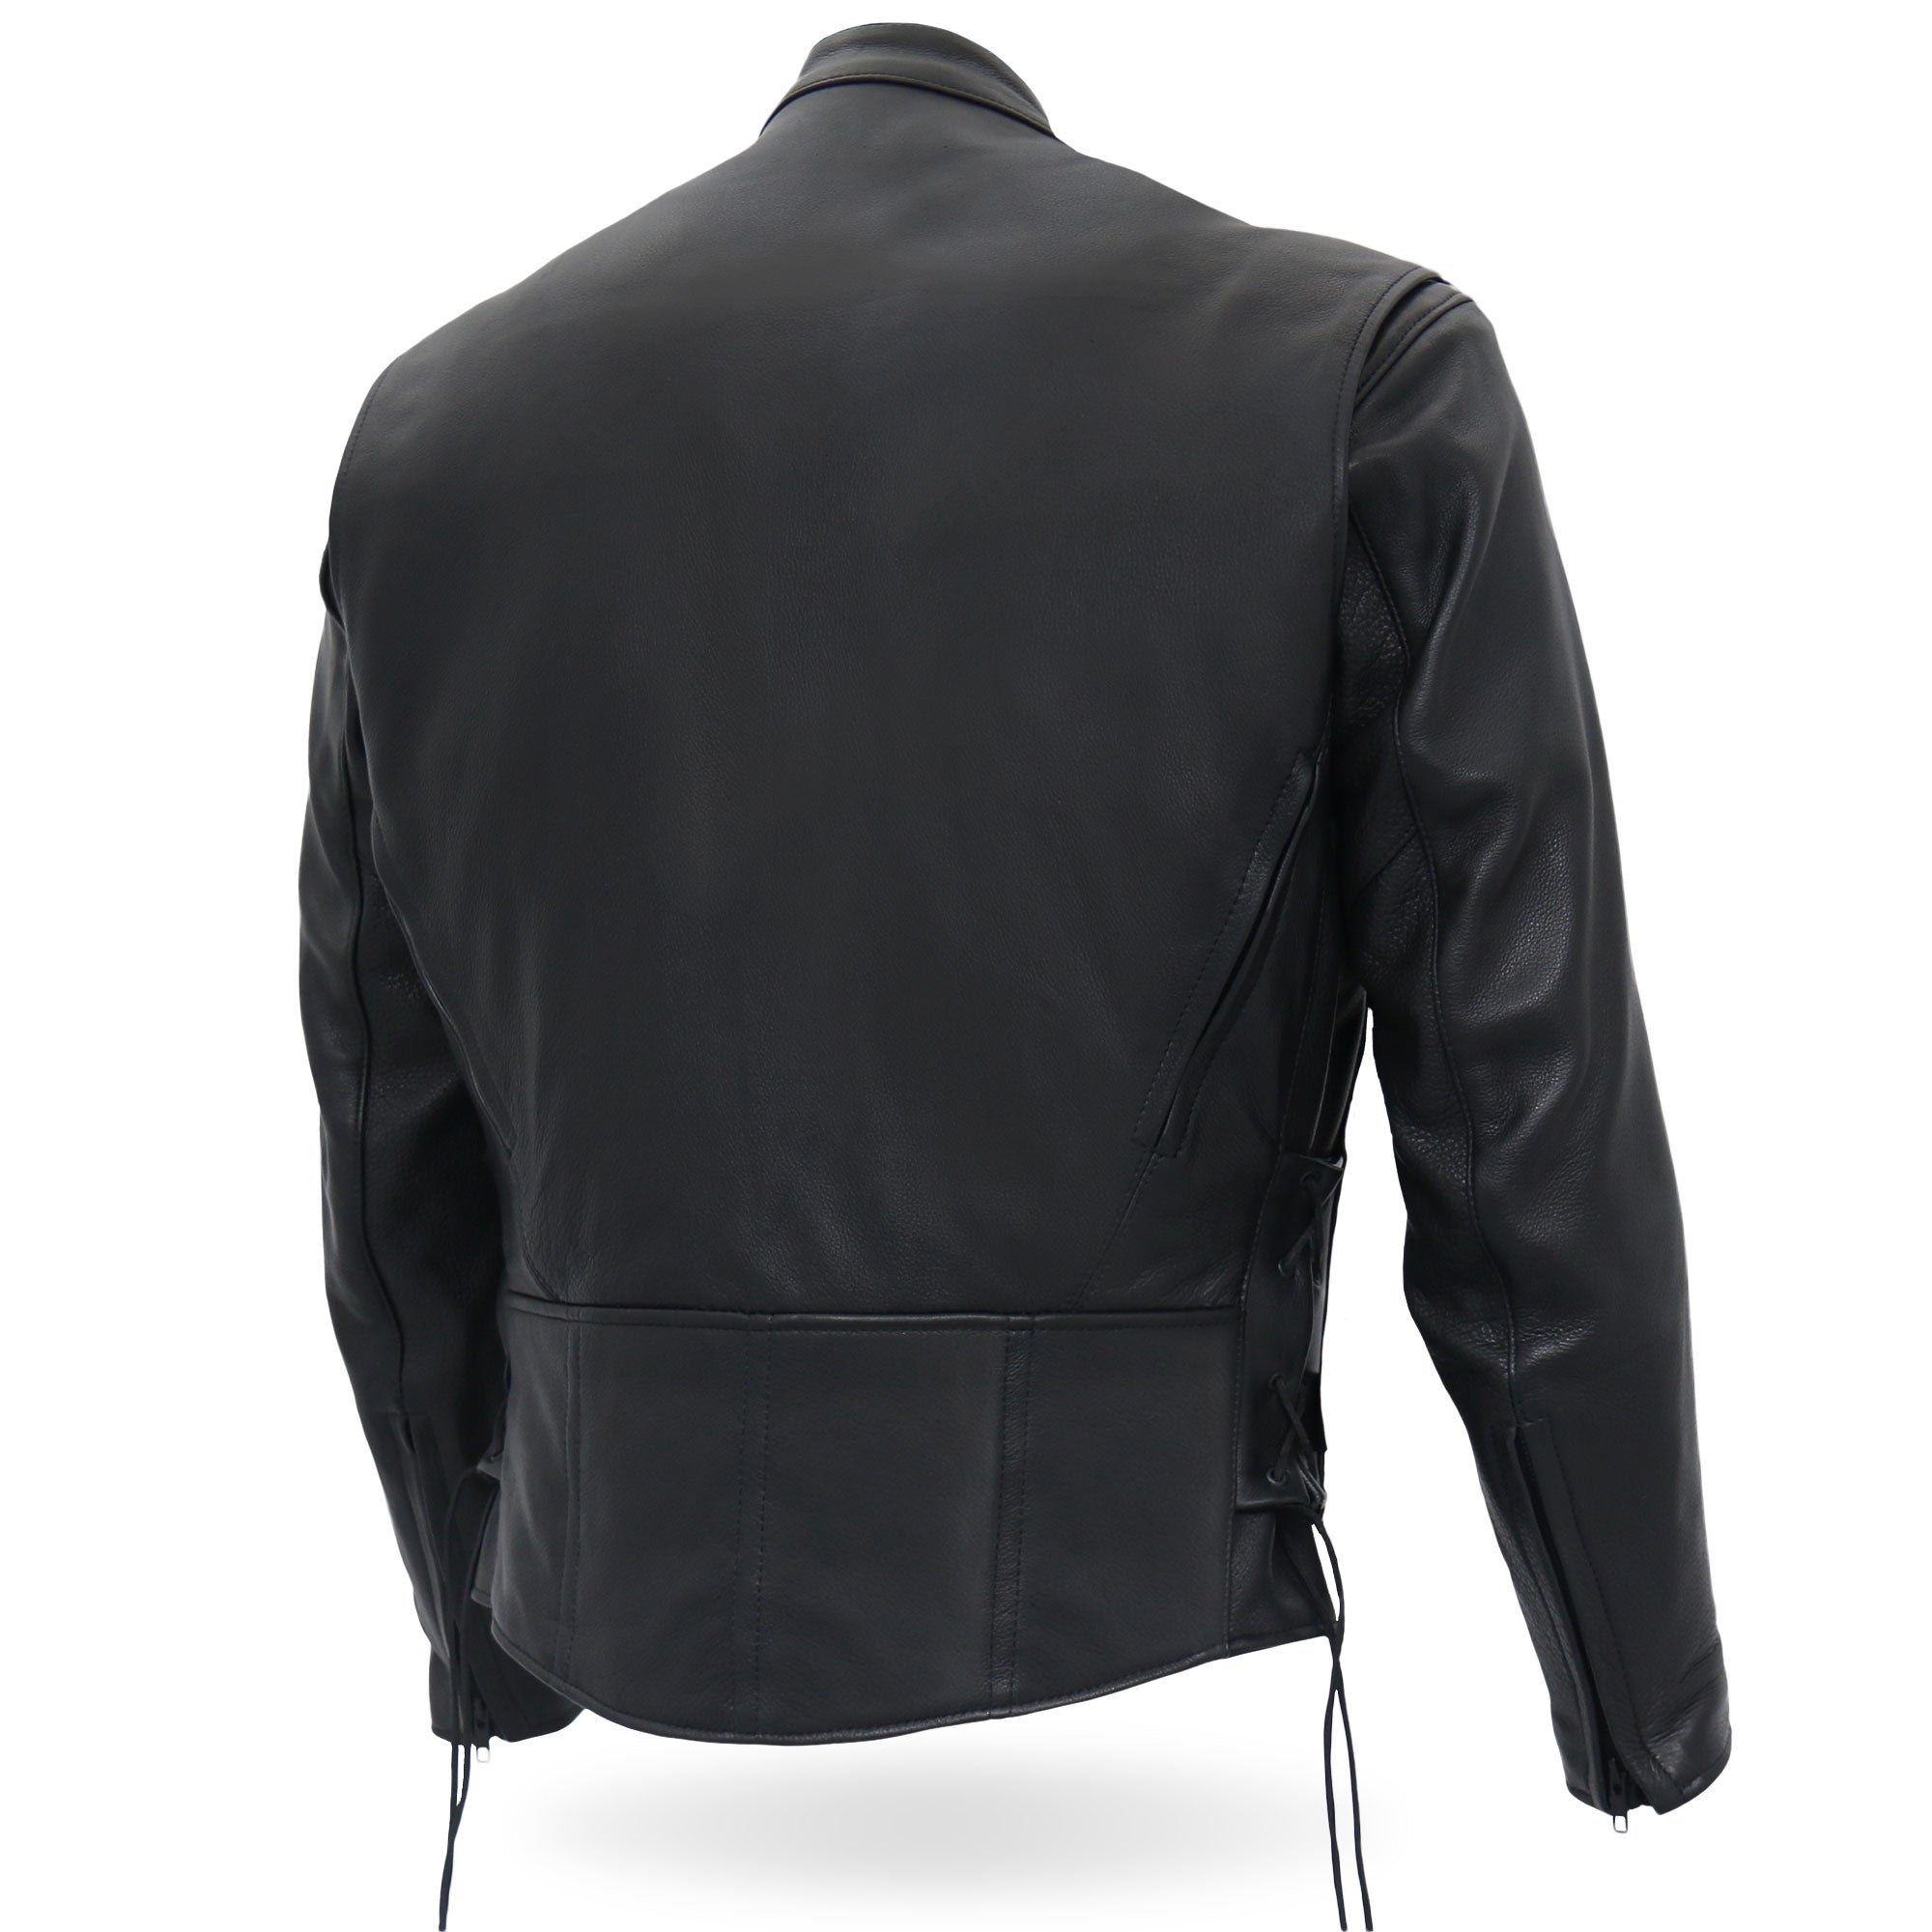 Hot Leathers JKM5002 Men's USA Made Vented Premium Leather Motorcycle Biker Jacket with Side Lace